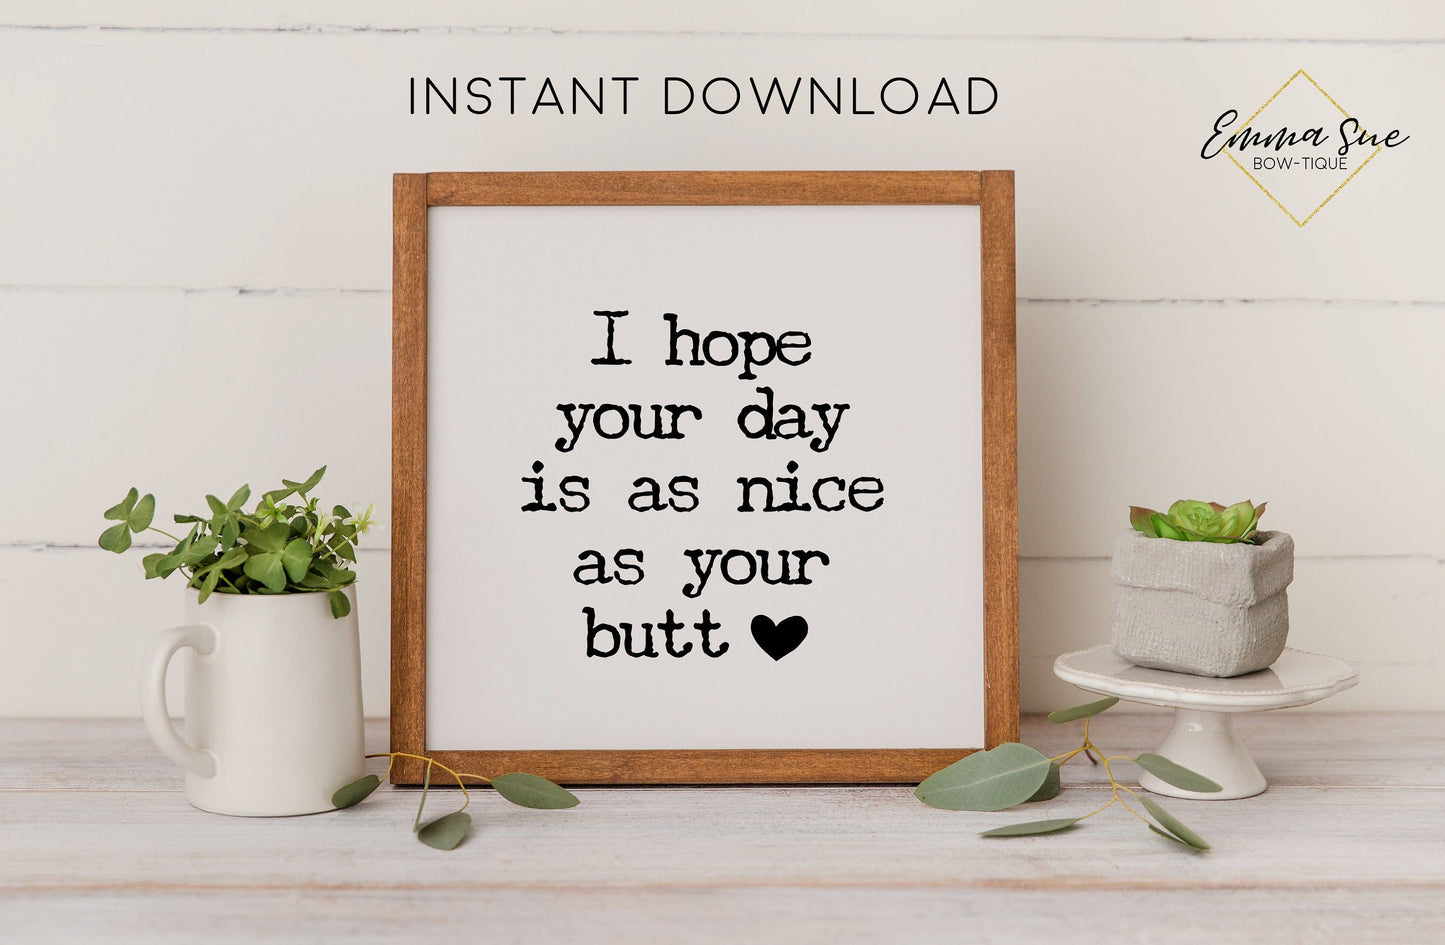 I hope your day is as nice as your butt - Funny Bathroom Wall Art Digital Printable Sign